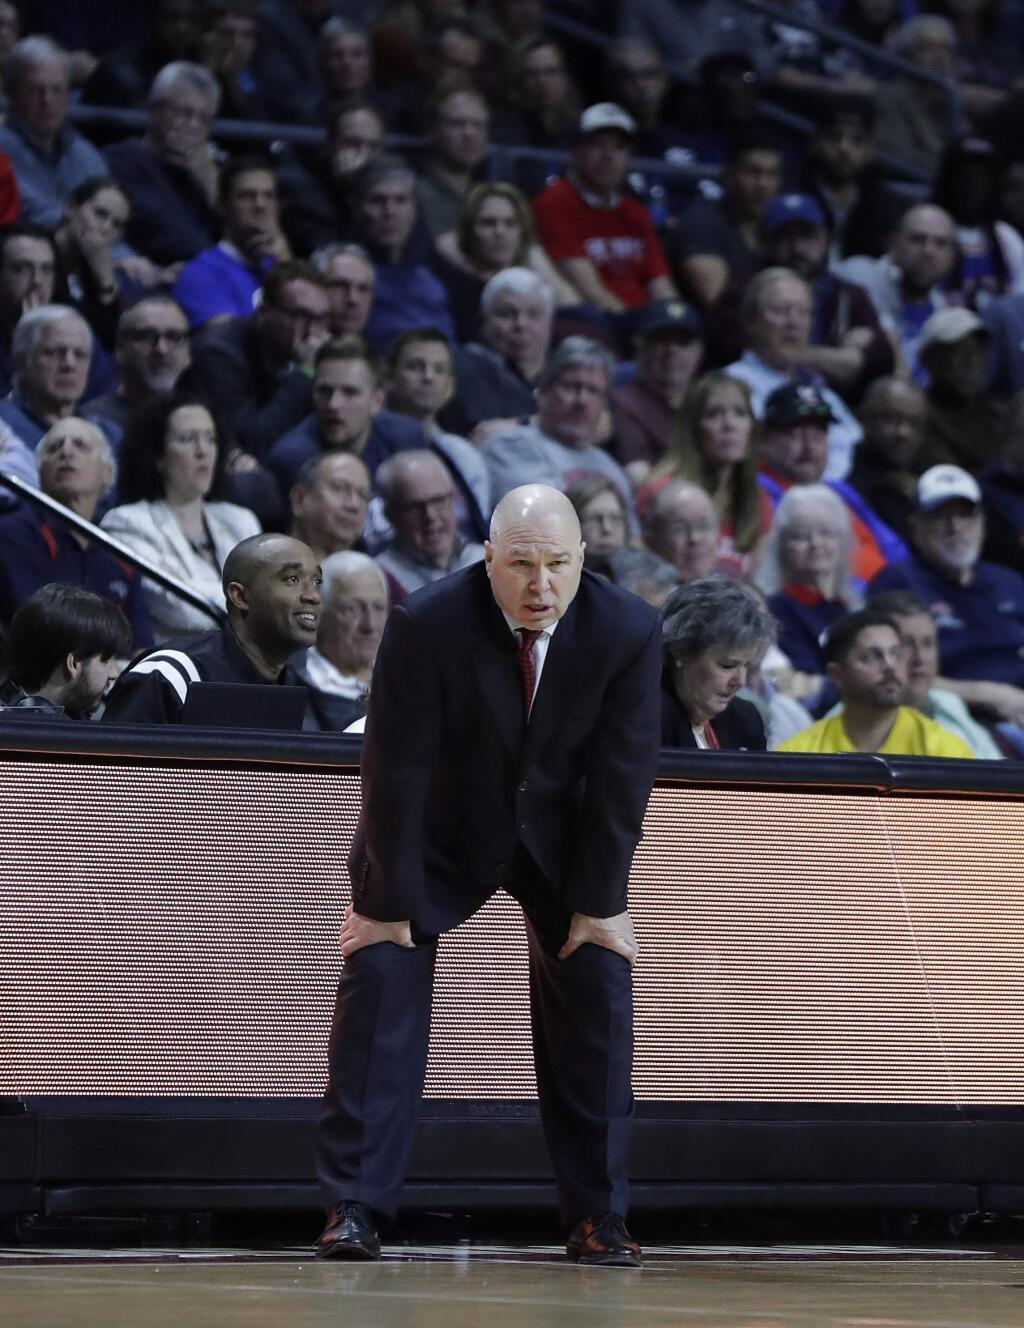 Saint Mary's head coach Randy Bennett watches his team during the second half of a West Coast Conference tournament NCAA college basketball game against BYU, Monday, March 5, 2018, in Las Vegas. BYU defeated Saint Mary's 85-72. (AP Photo/Isaac Brekken)